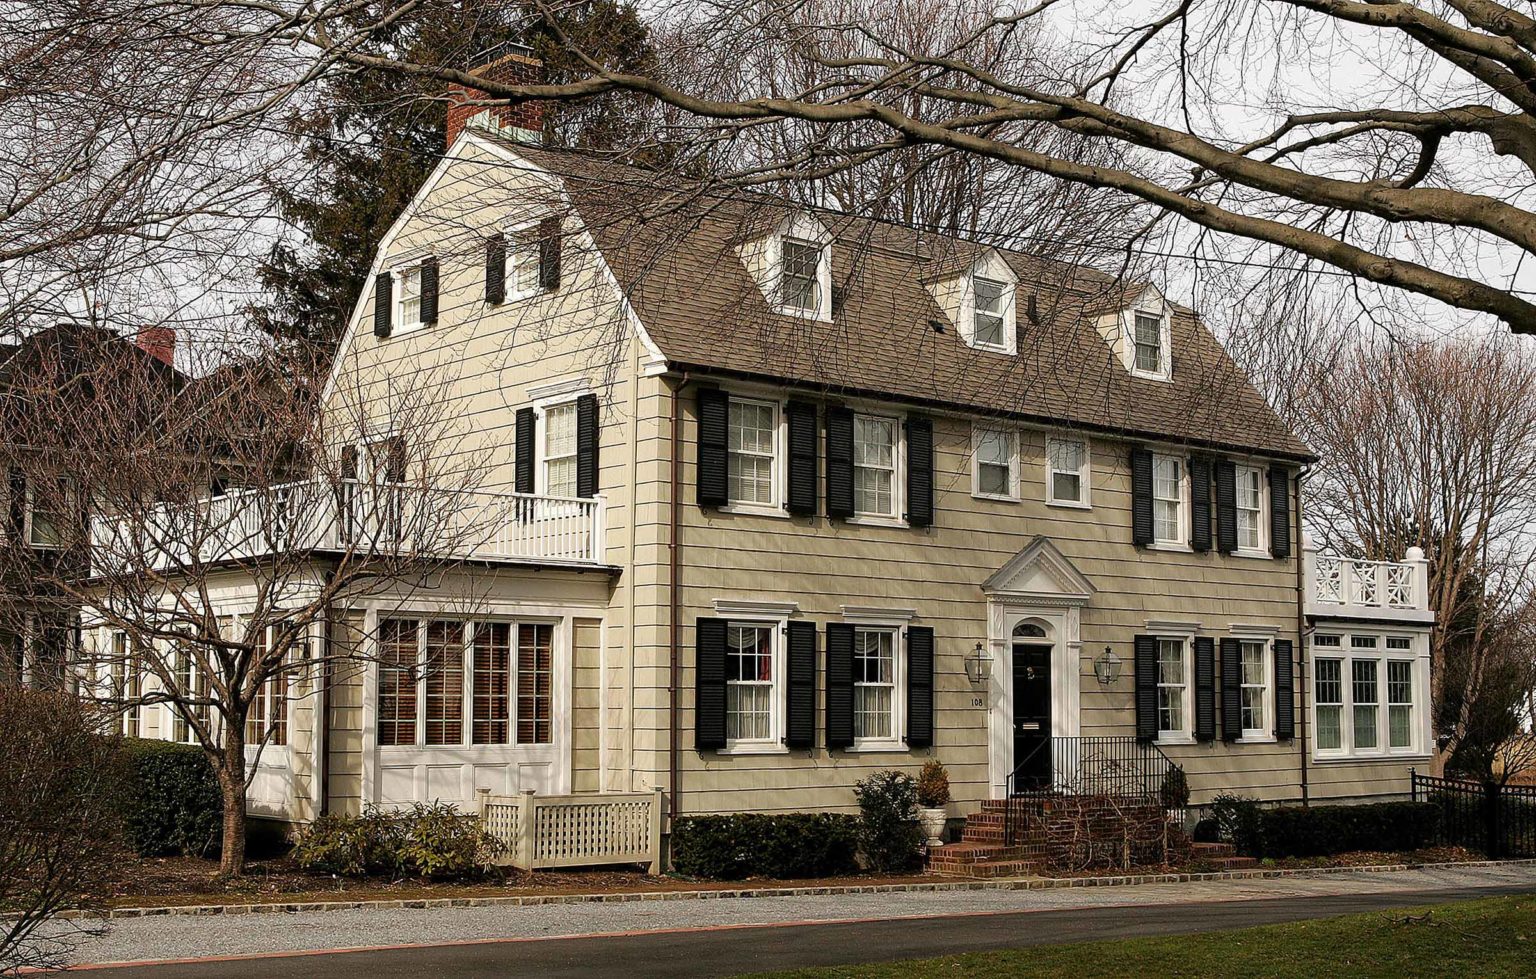 Some places just can’t shake their dark pasts. The Amityville Murder House is no exception to this rule. Here's the story of Ronald “Butch” DeFeo Jr.